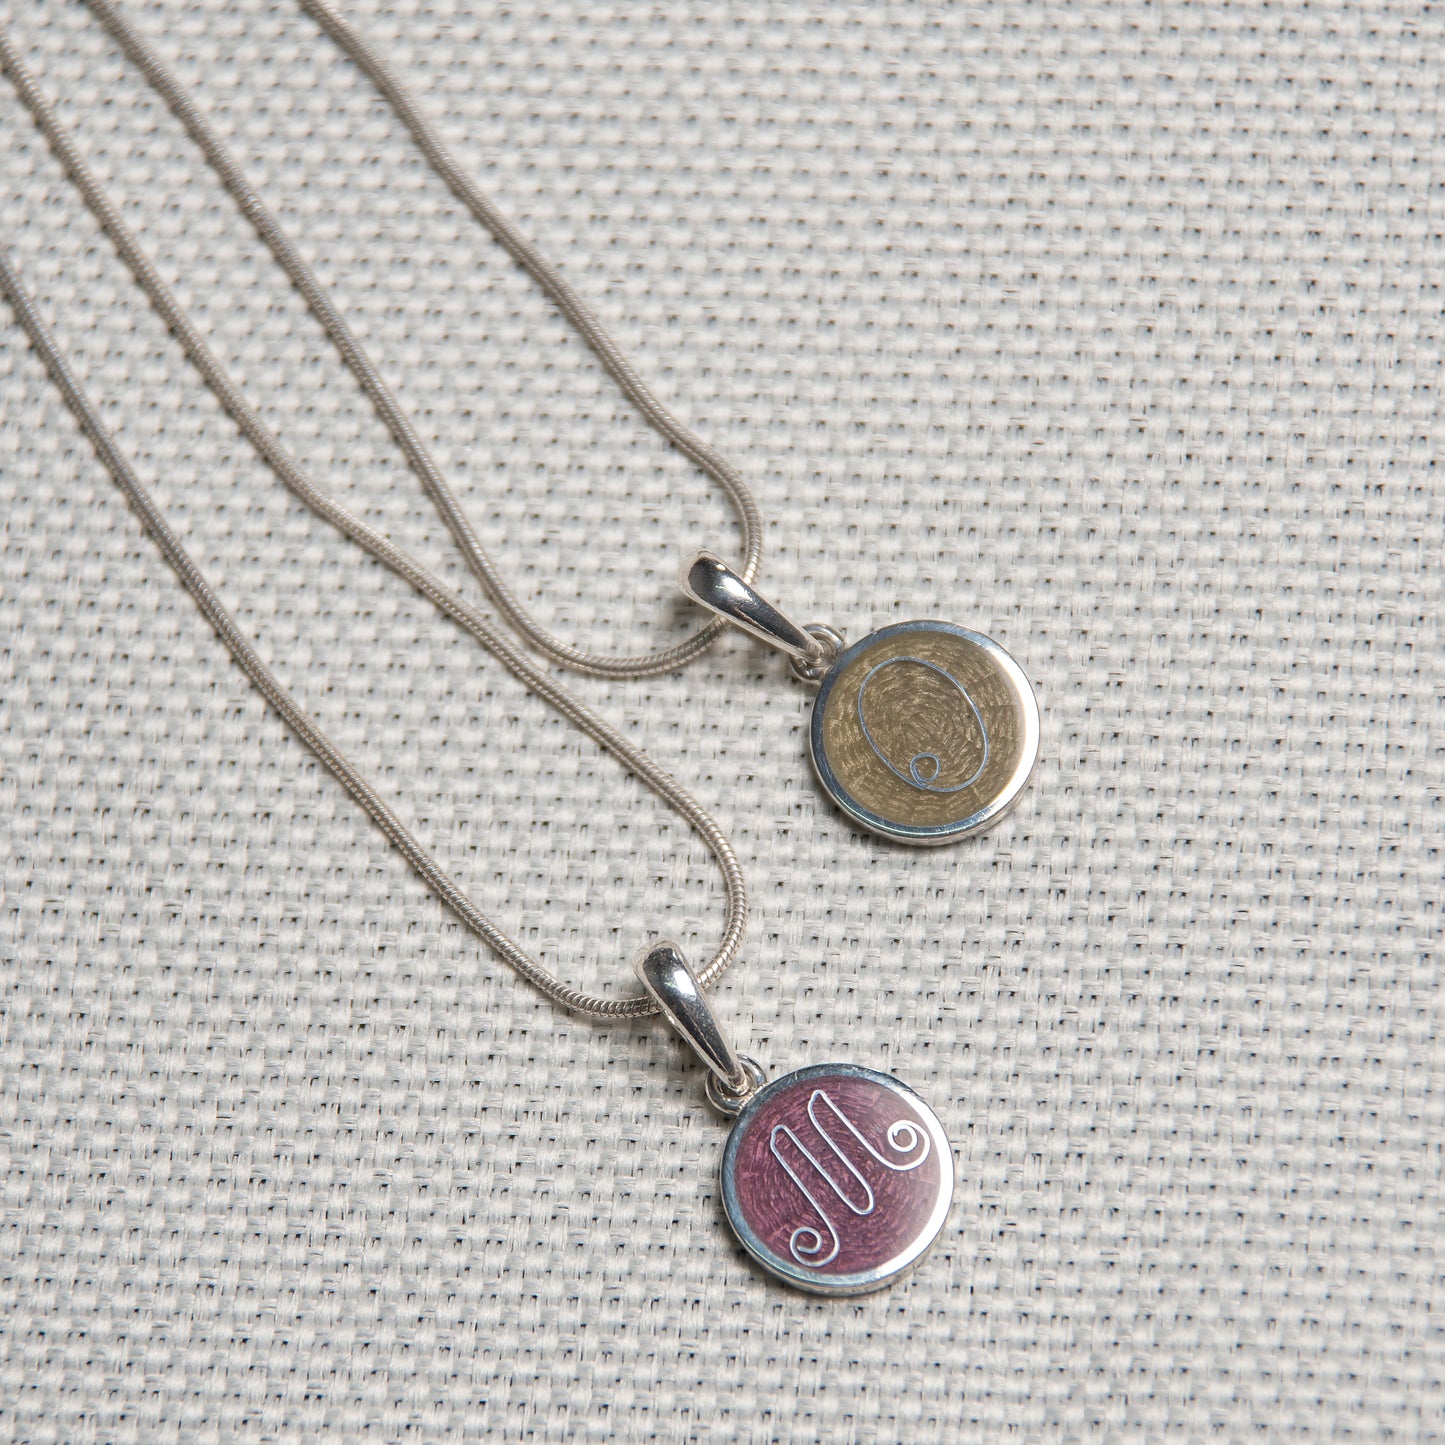 Initial Necklace, Cloisonne Enamel And Sterling Silver Pendant With Letters